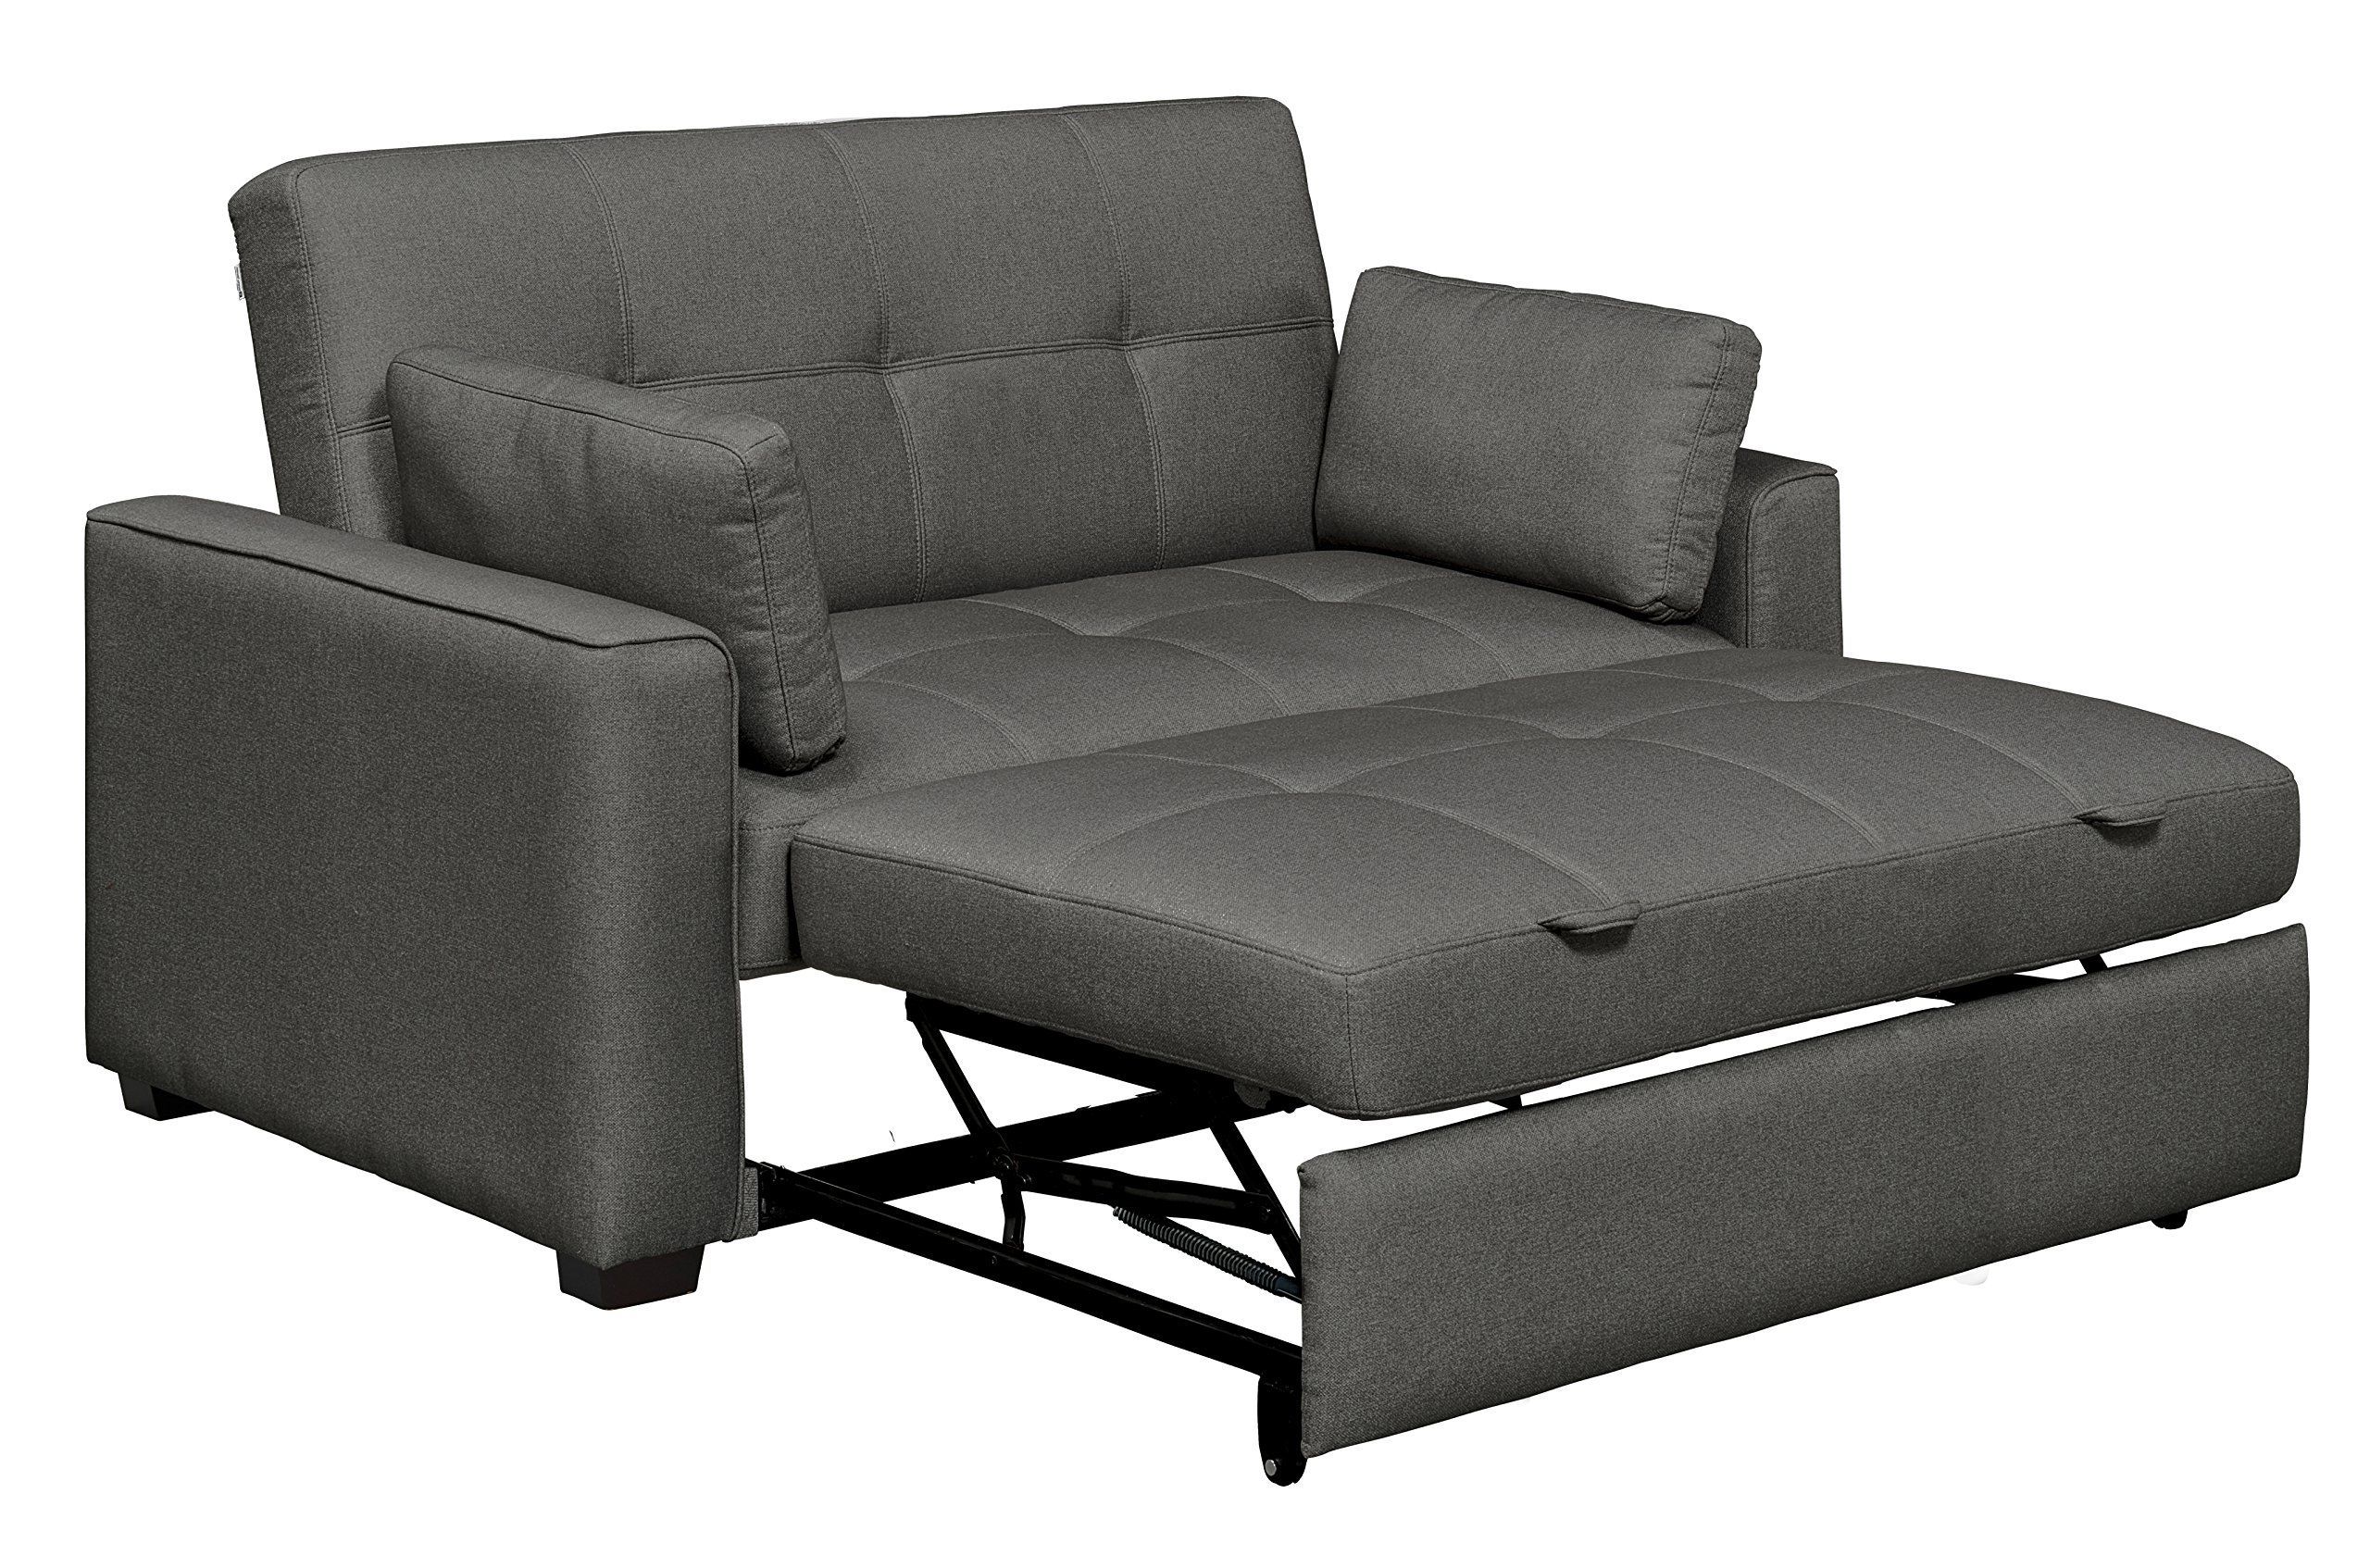 Convertible Gray Loveseat Sleepers With Regard To Newest Mechali Products Furniture Serta Sofa Sleeper Convertible Into Lounger (View 5 of 15)